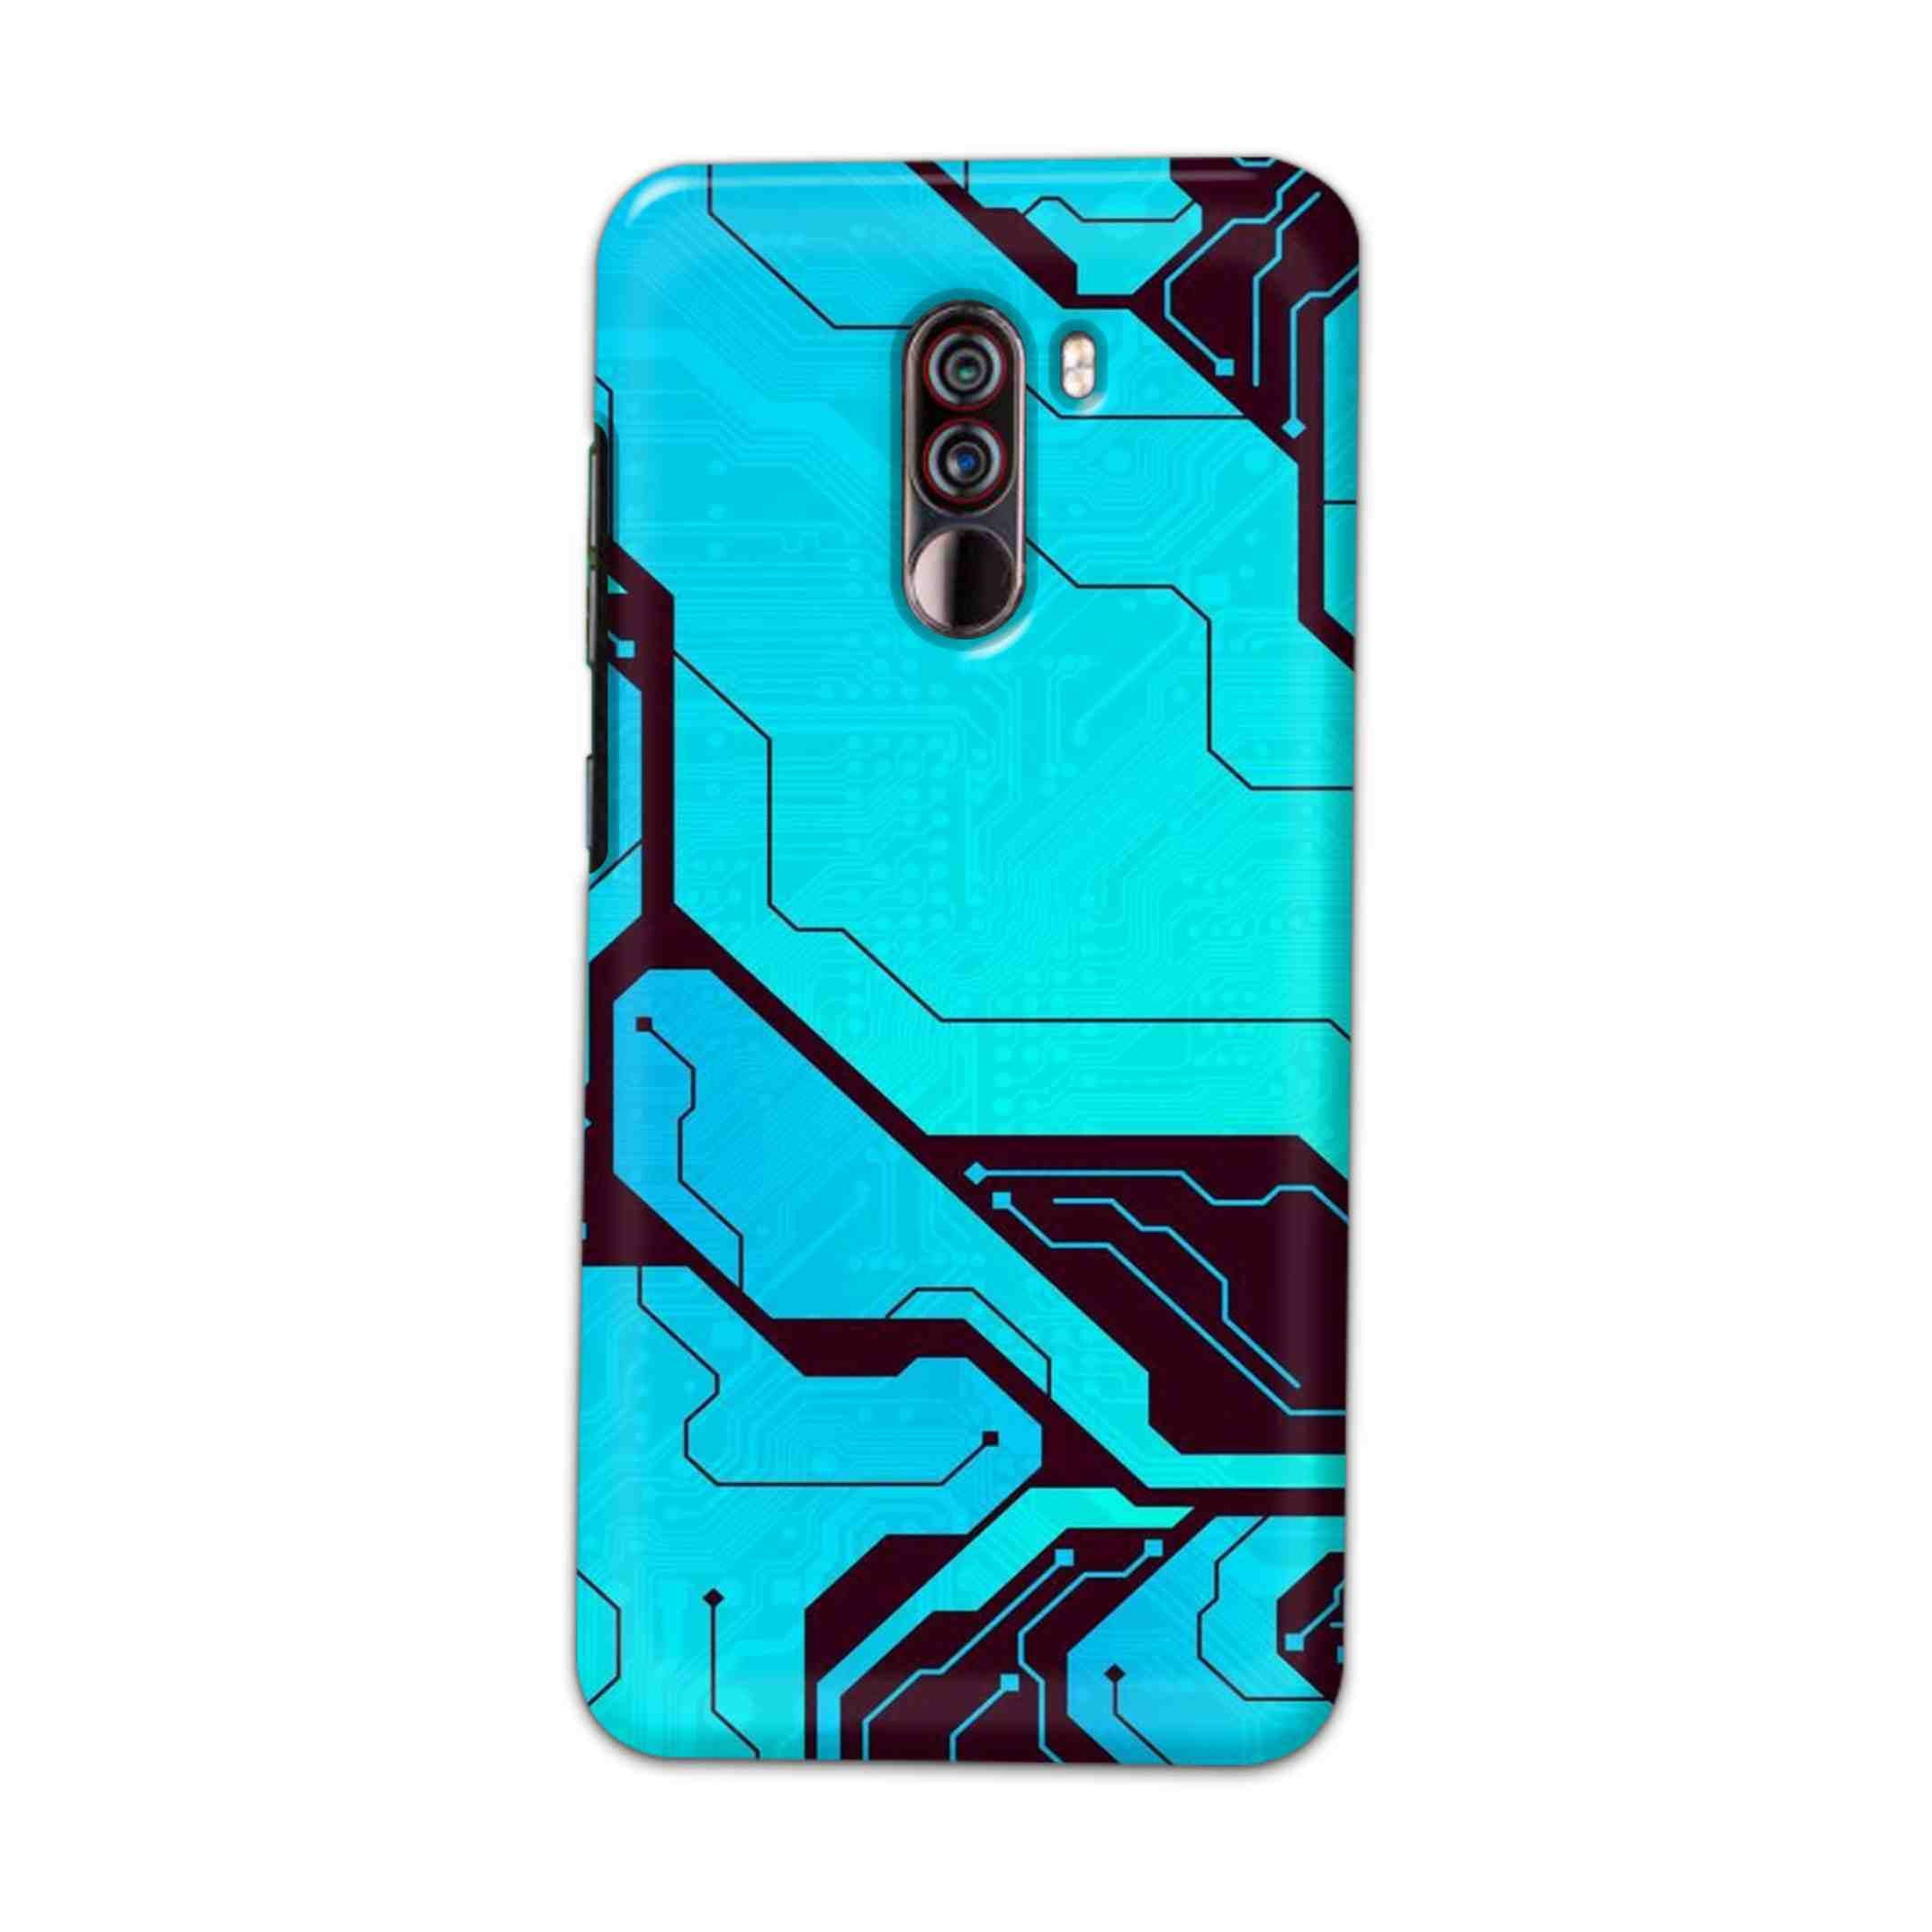 Buy Futuristic Line Hard Back Mobile Phone Case Cover For Xiaomi Pocophone F1 Online